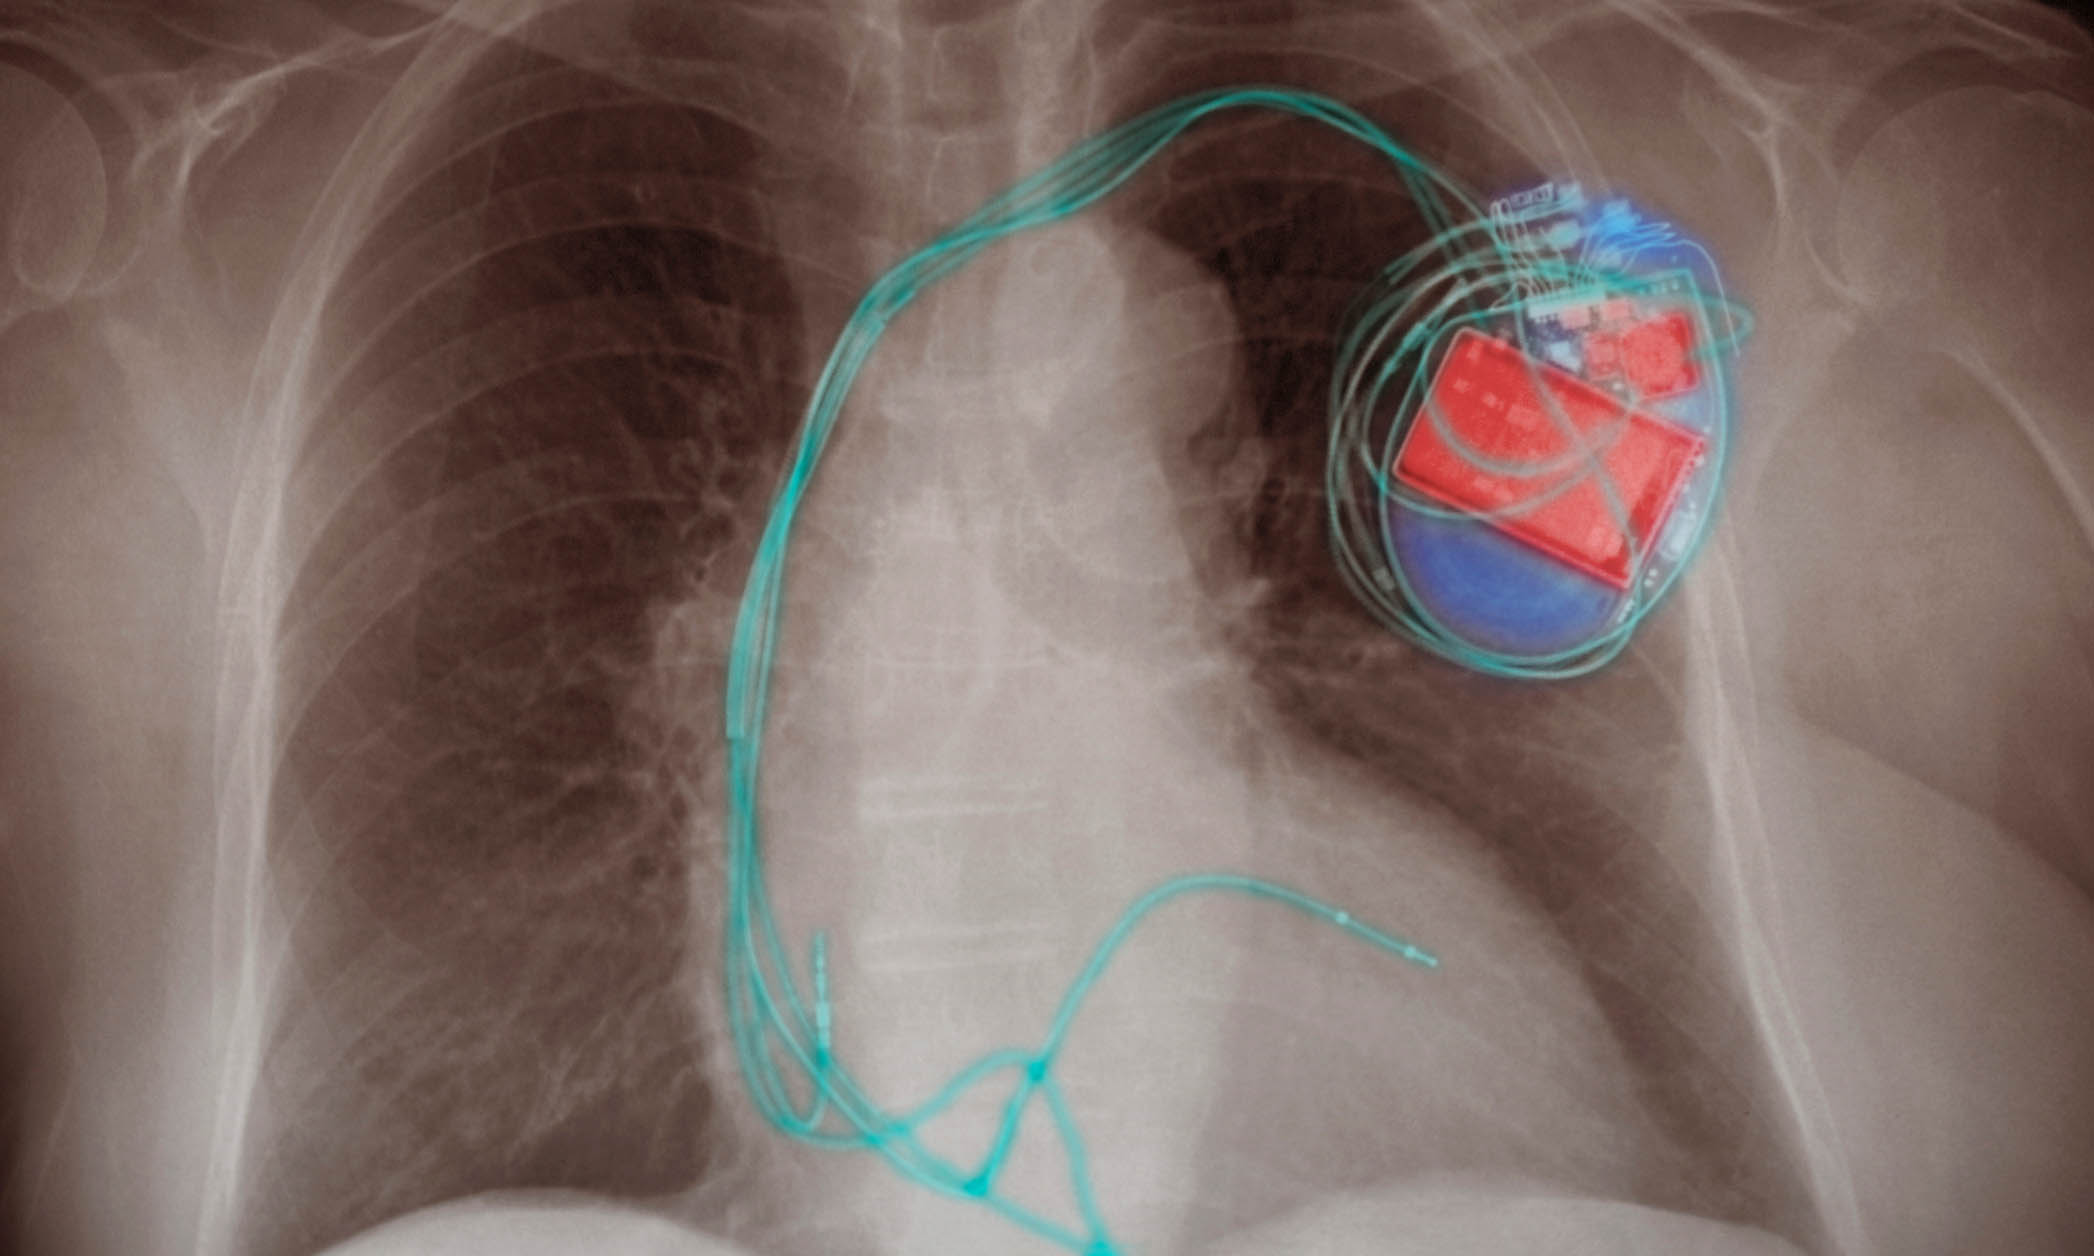 X-ray image showing a pacemaker and a patient's chest